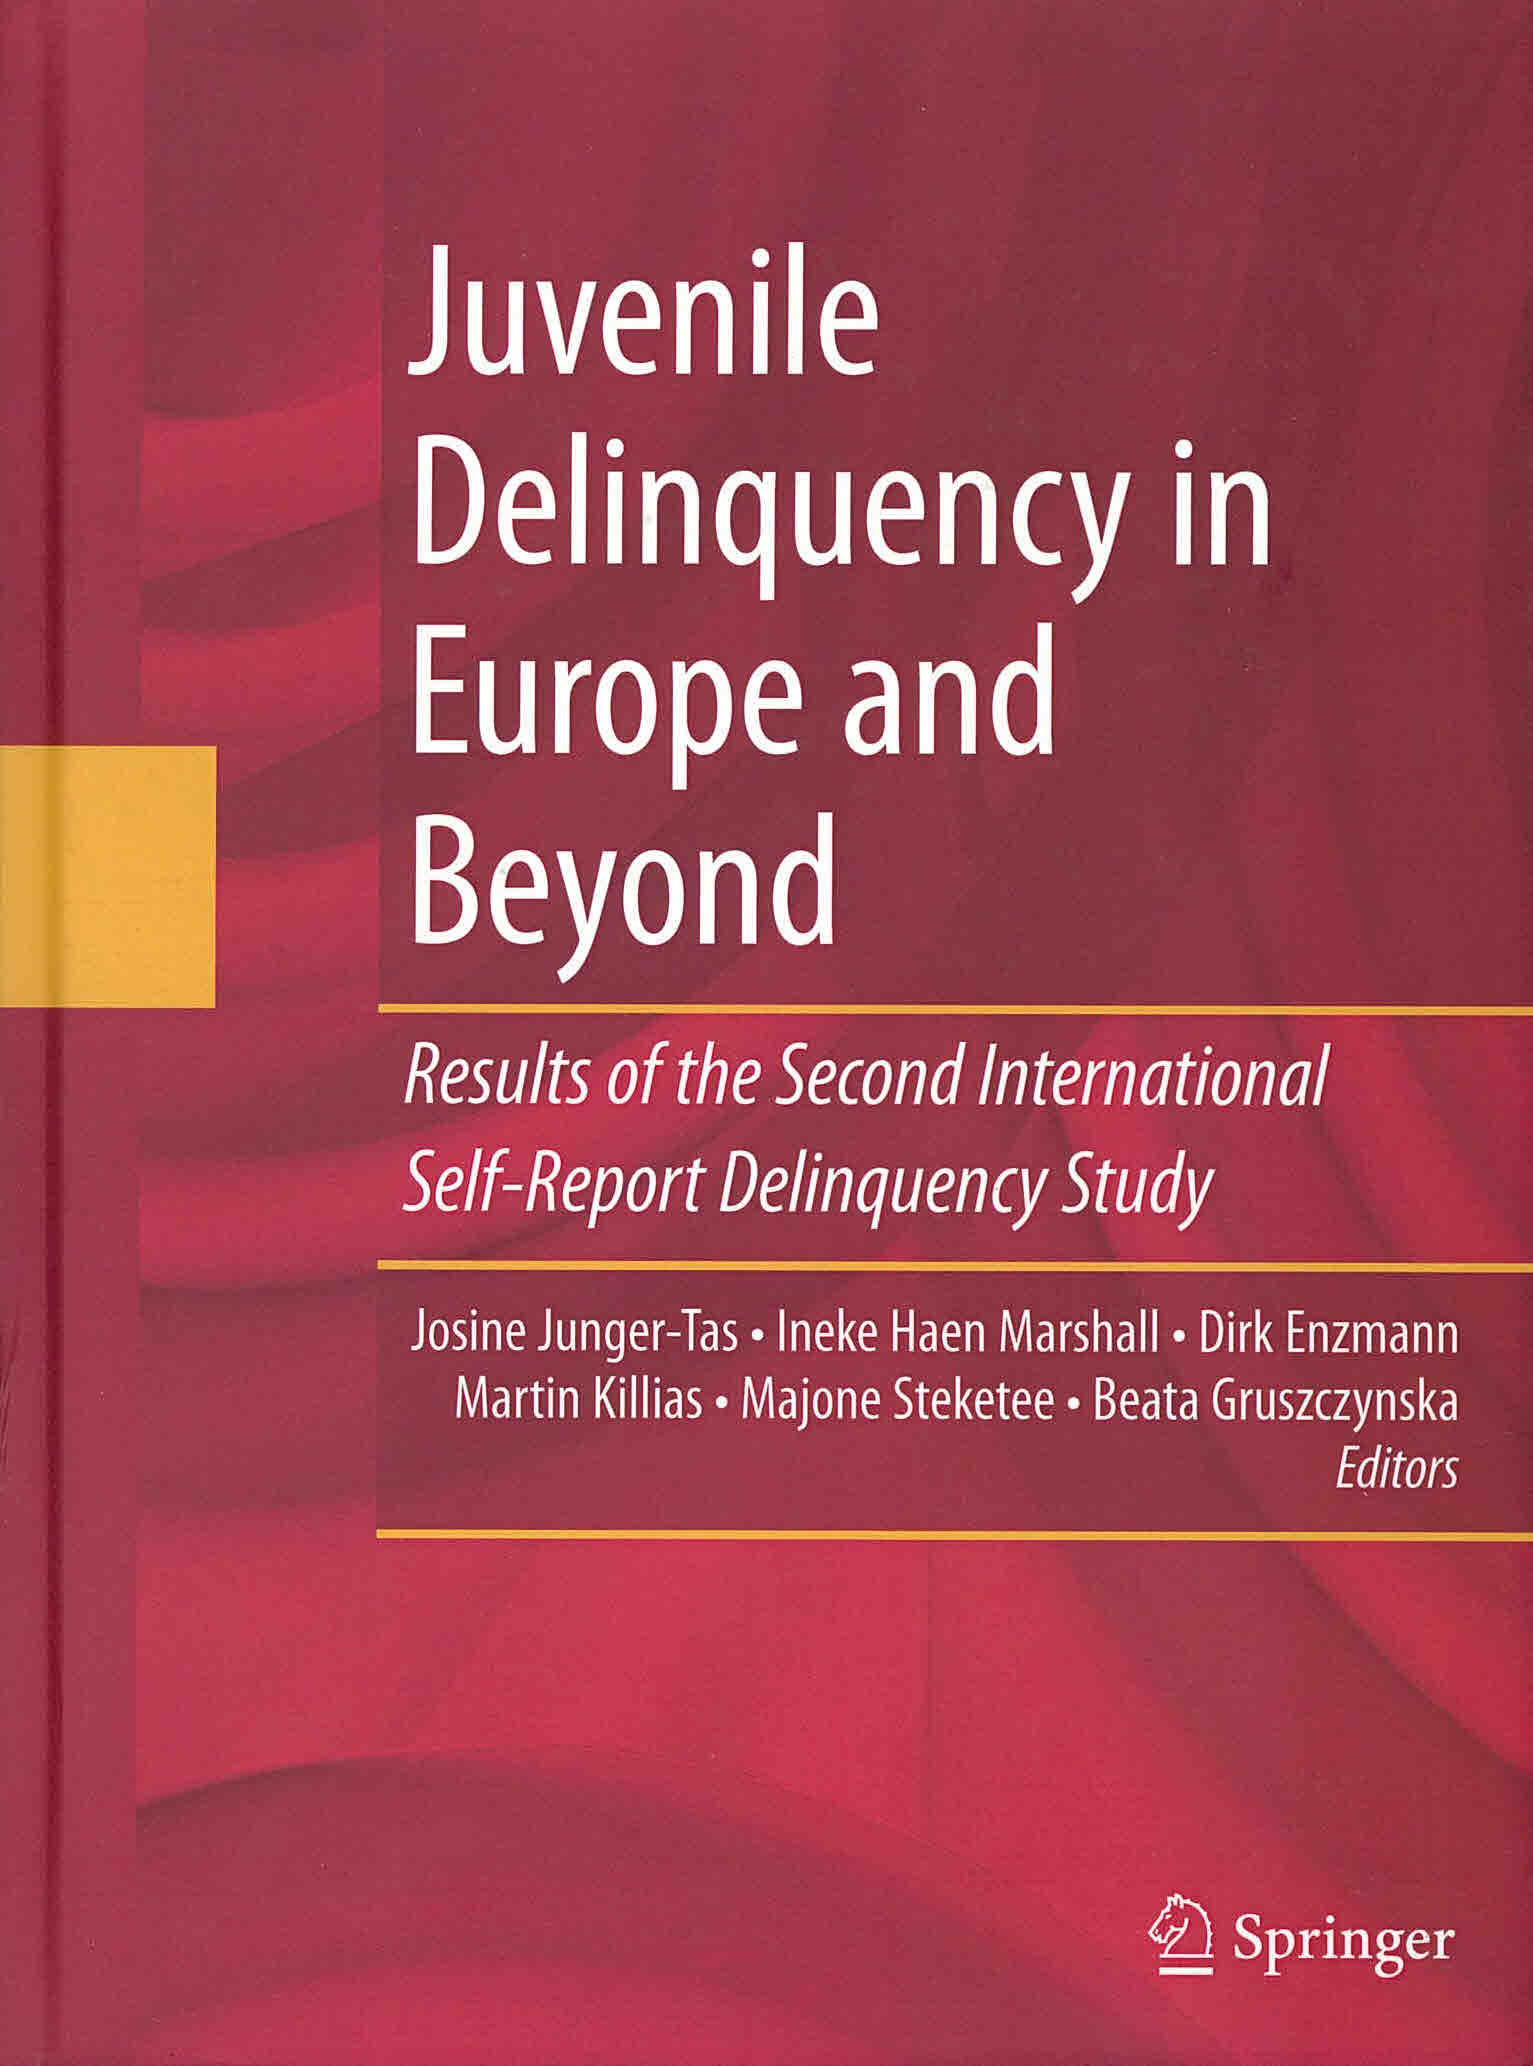 Juvenile delinquency in Europe and beyond. Result of the Second International Self-Report Delinquency study